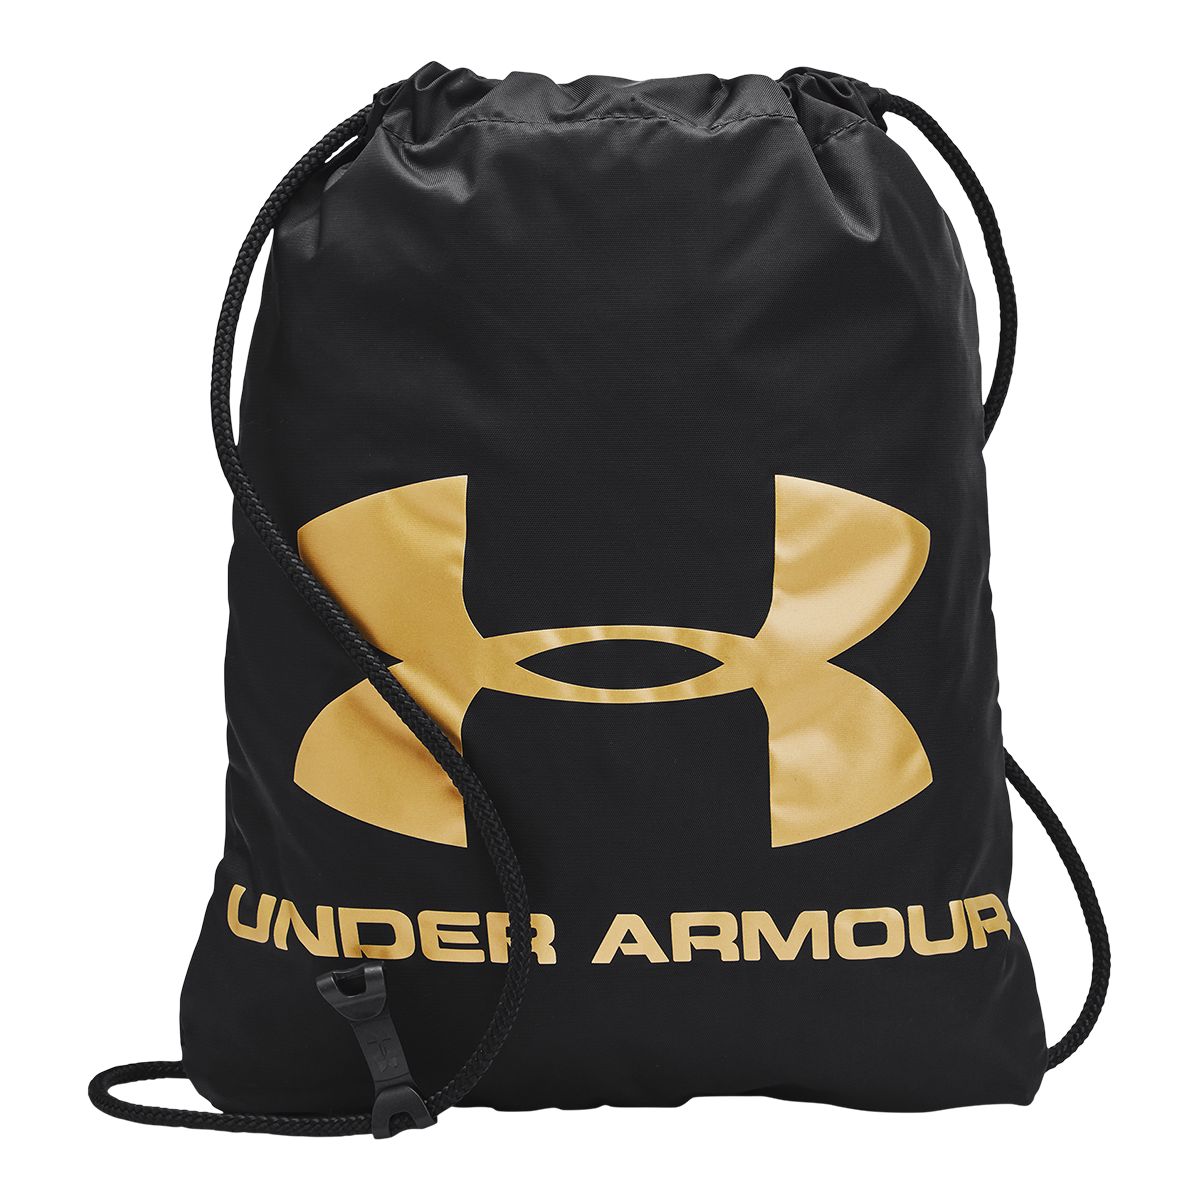 Image of Under Armour Ozsee Sackpack/Drawstring Bag 16L